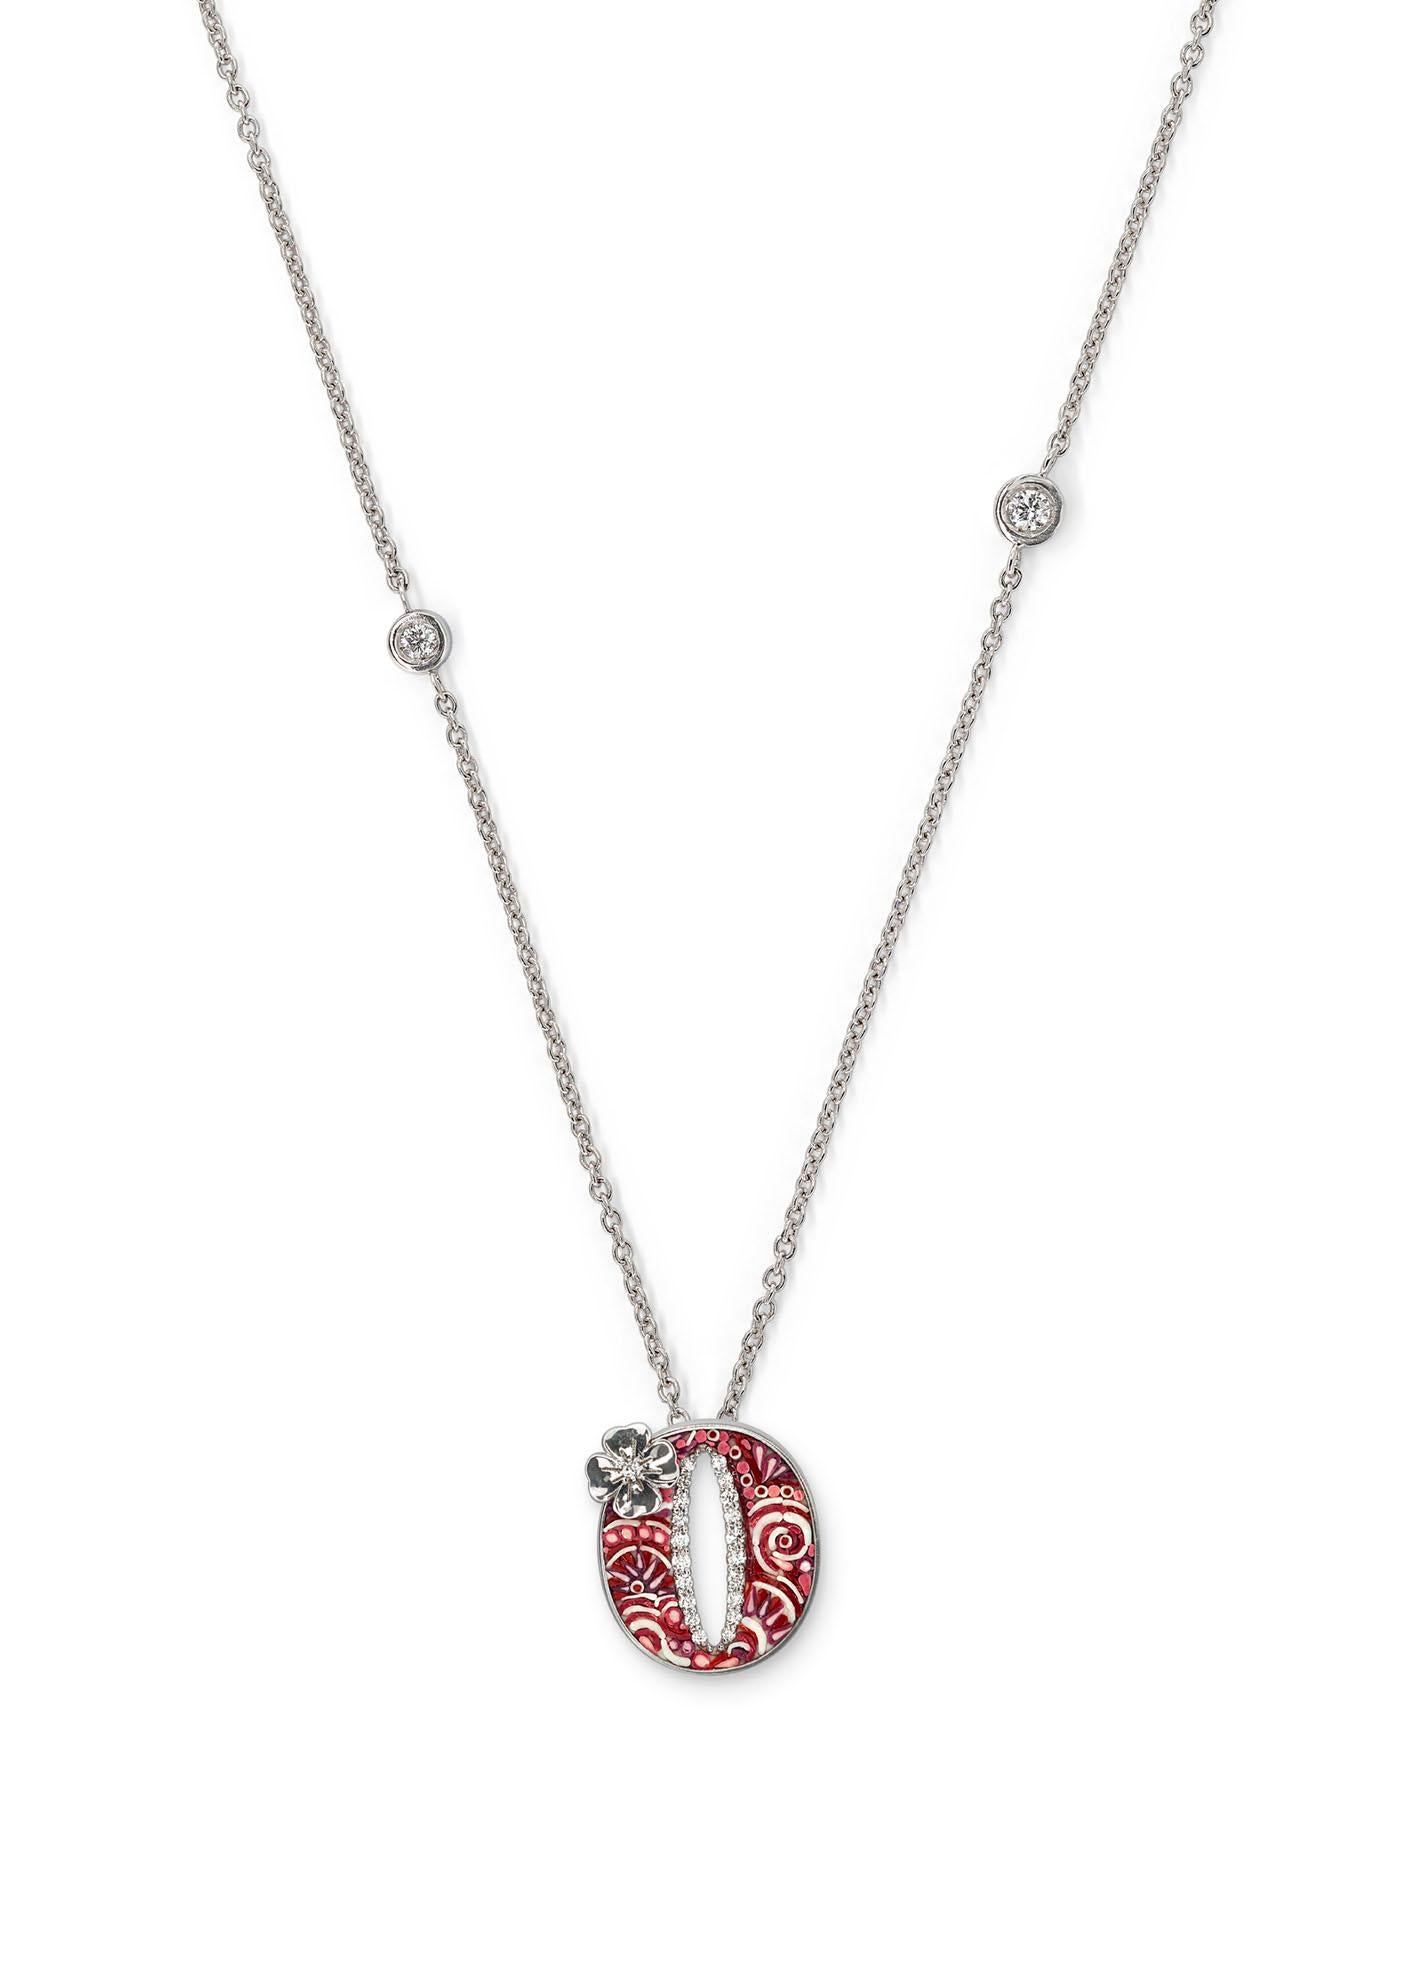 Brilliant Cut Necklace Letter O White Gold White Diamonds Hand Decorated with Micromosaic For Sale